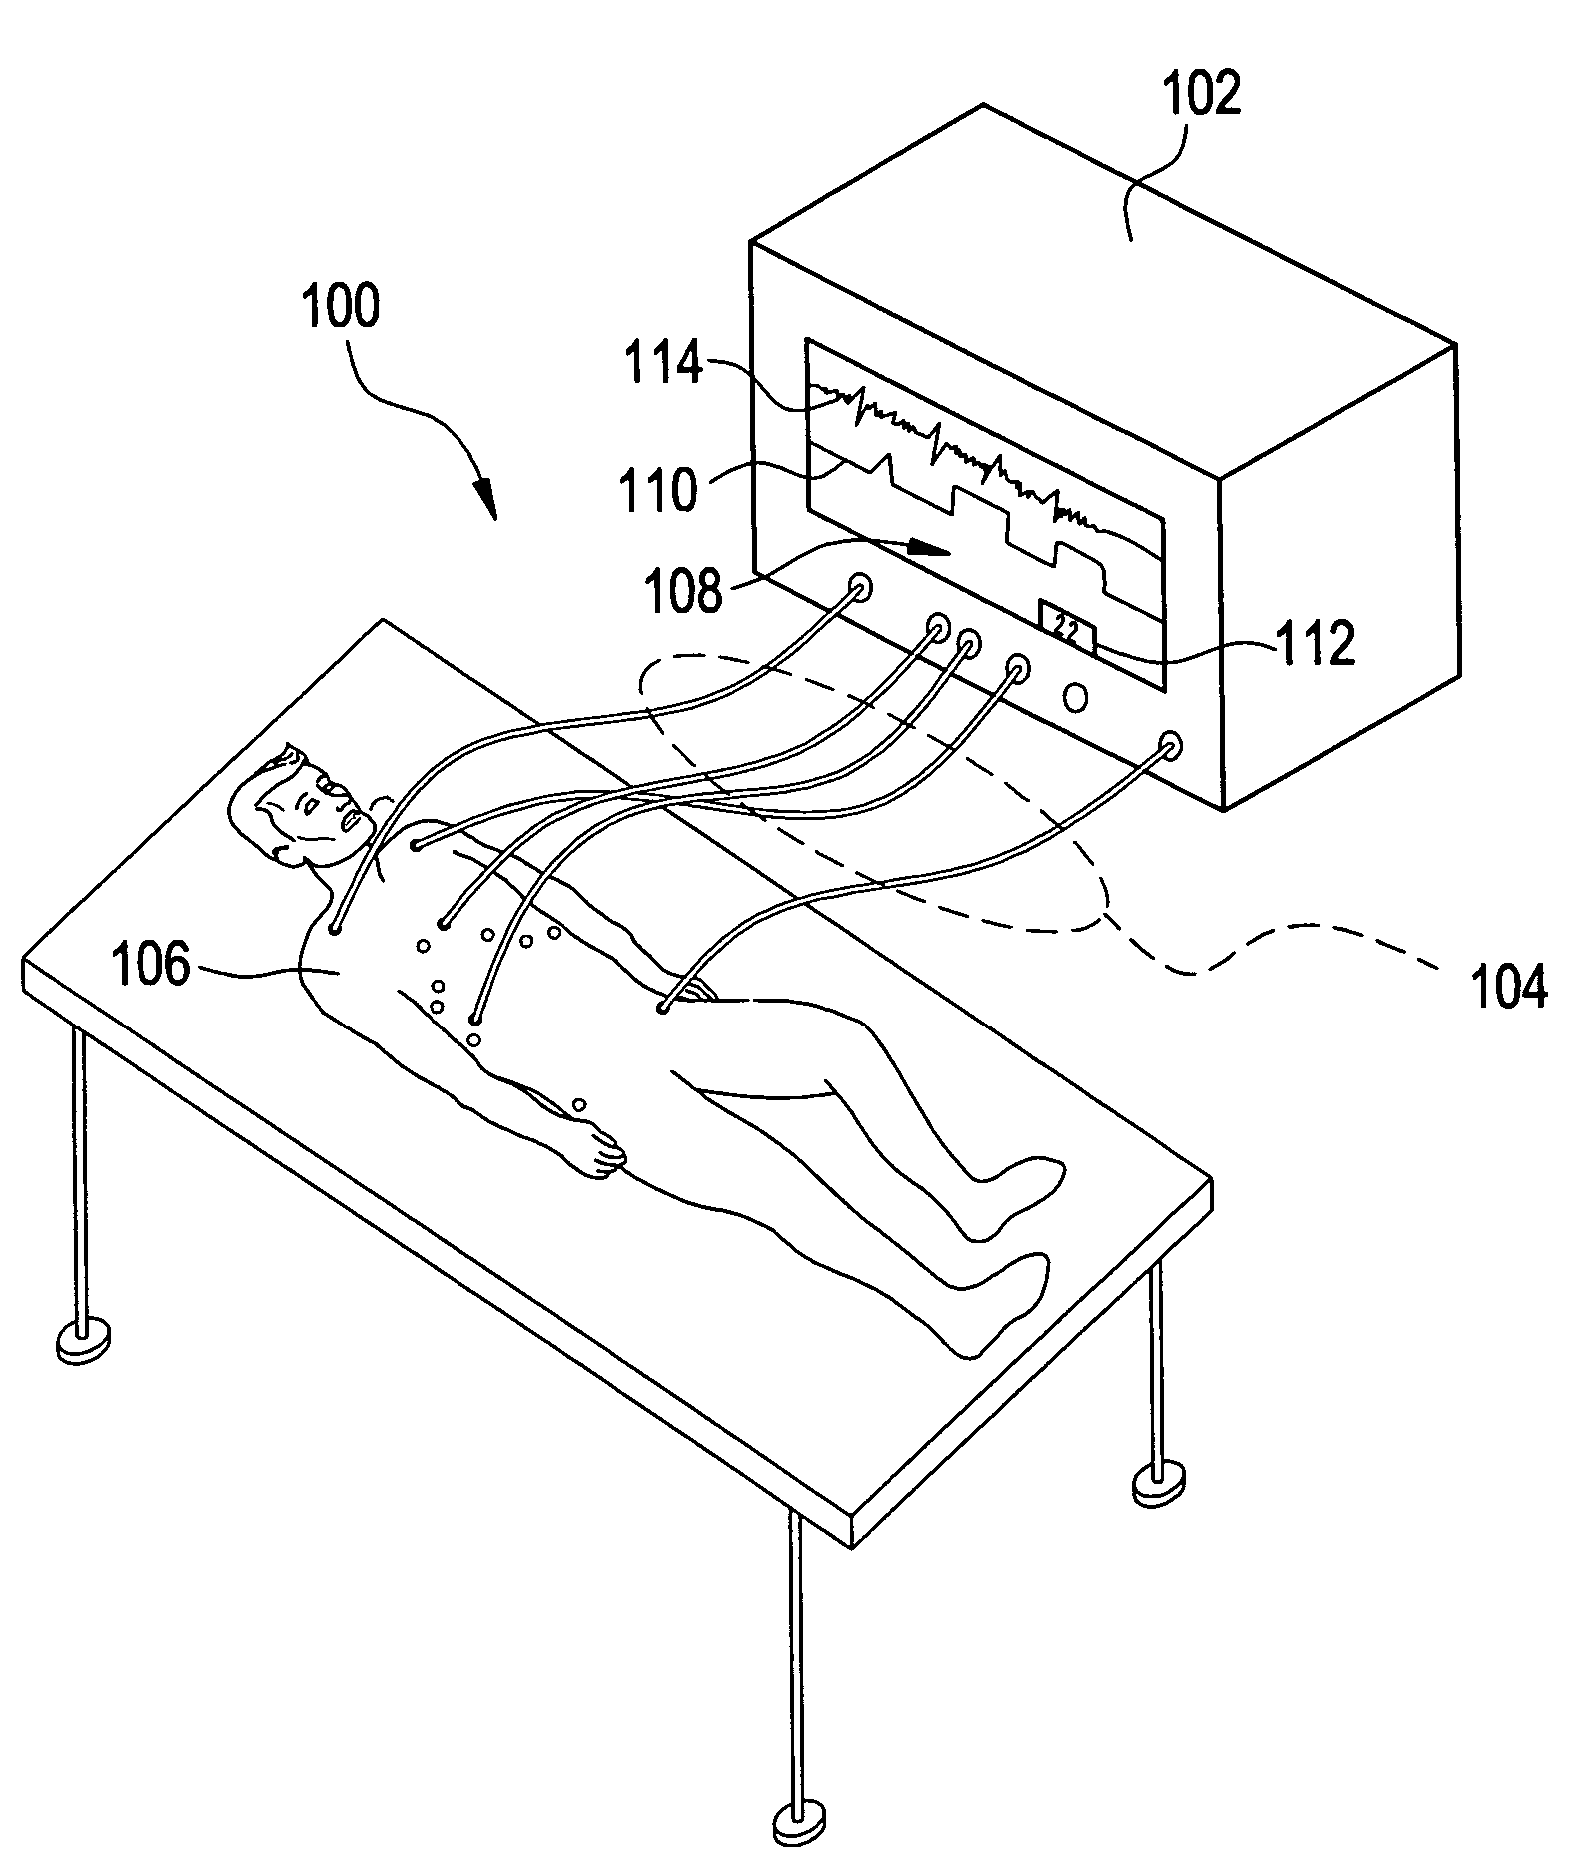 Respiration monitoring system and method